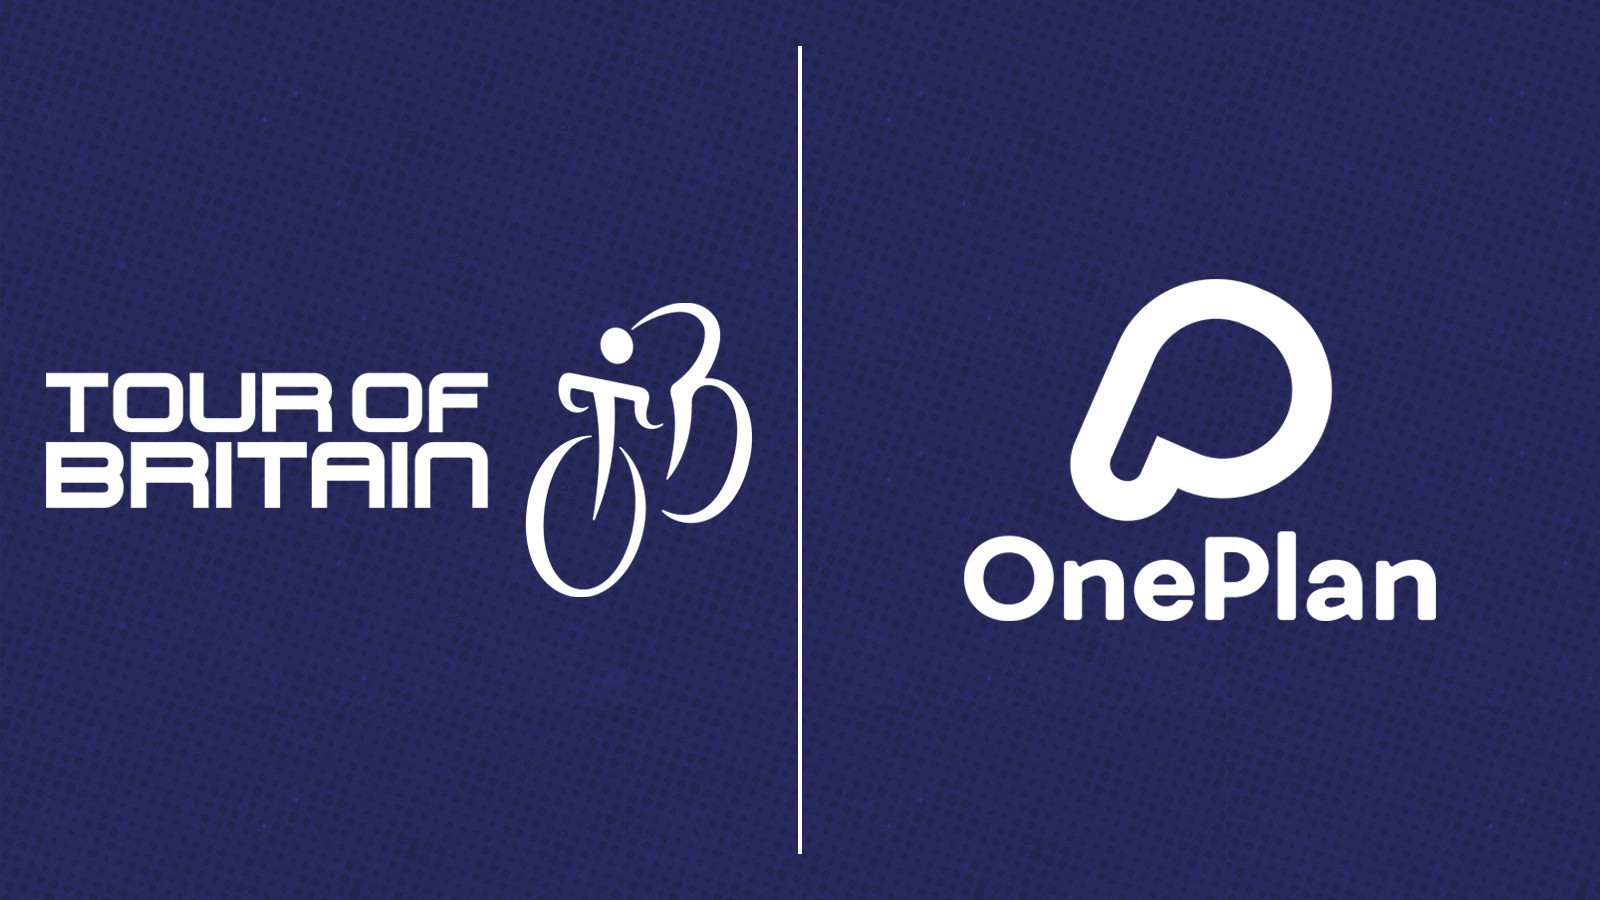 OnePlan announced as event planning suppliers for Tour of Britain and Women’s Tour cycling races